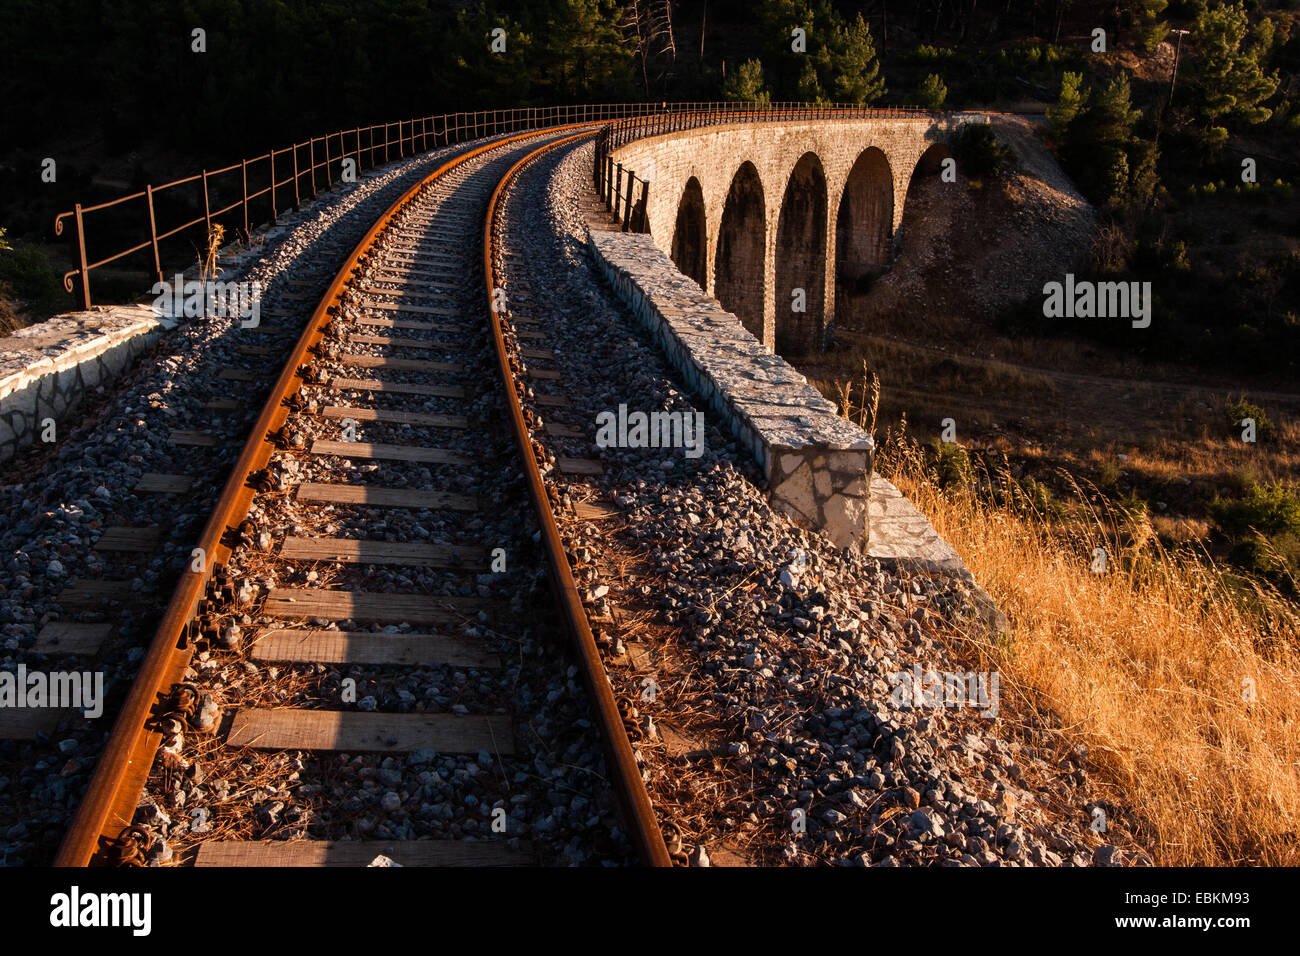 The largest train stone bridge in Greece (110m with 12 arches) Stock Photo